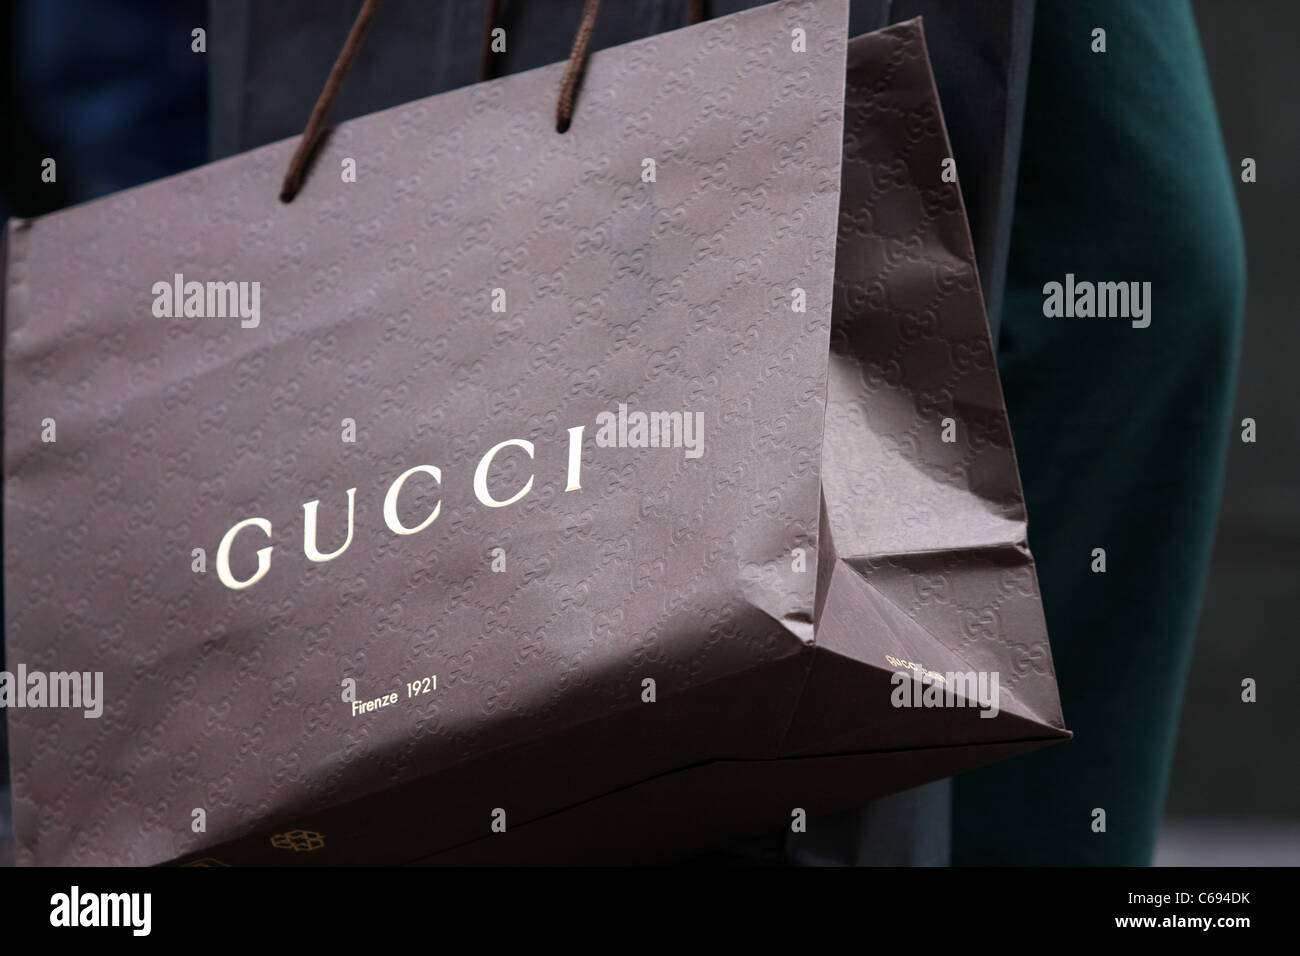 Authentic Gucci Grey Animal Print Plastic Bag on sale at JHROP